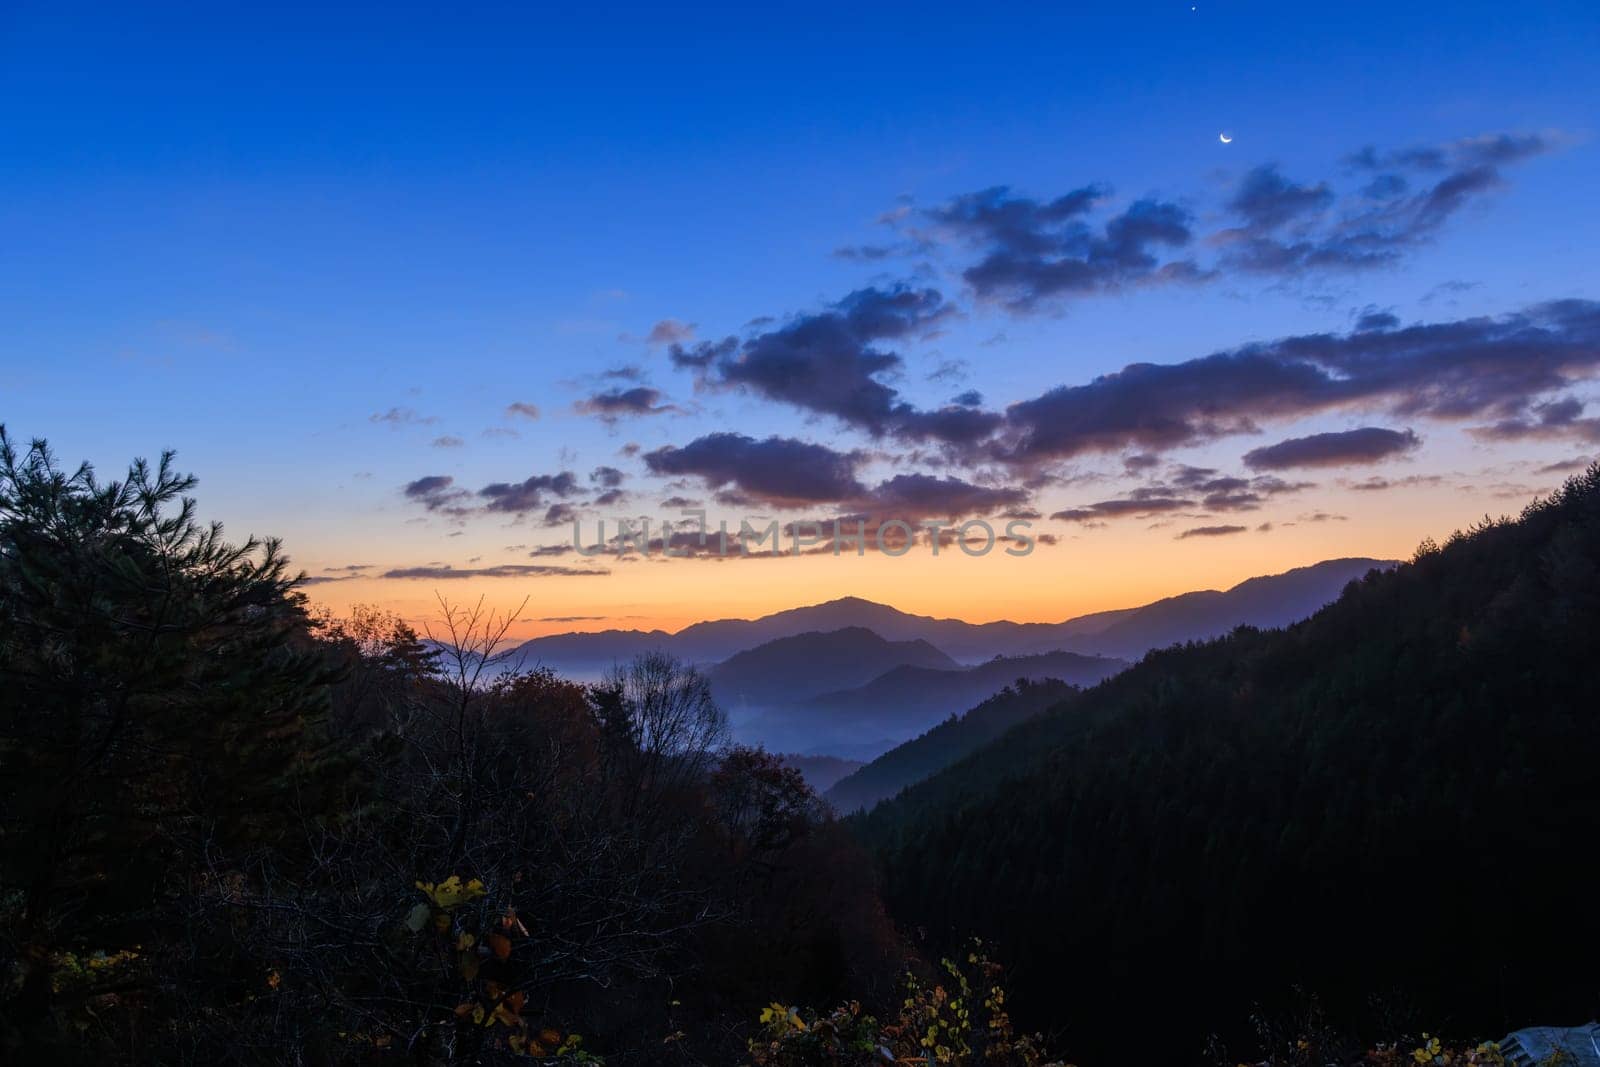 Dawn fog and mist in mountain valley with sunrise glow and moon in sky by Osaze